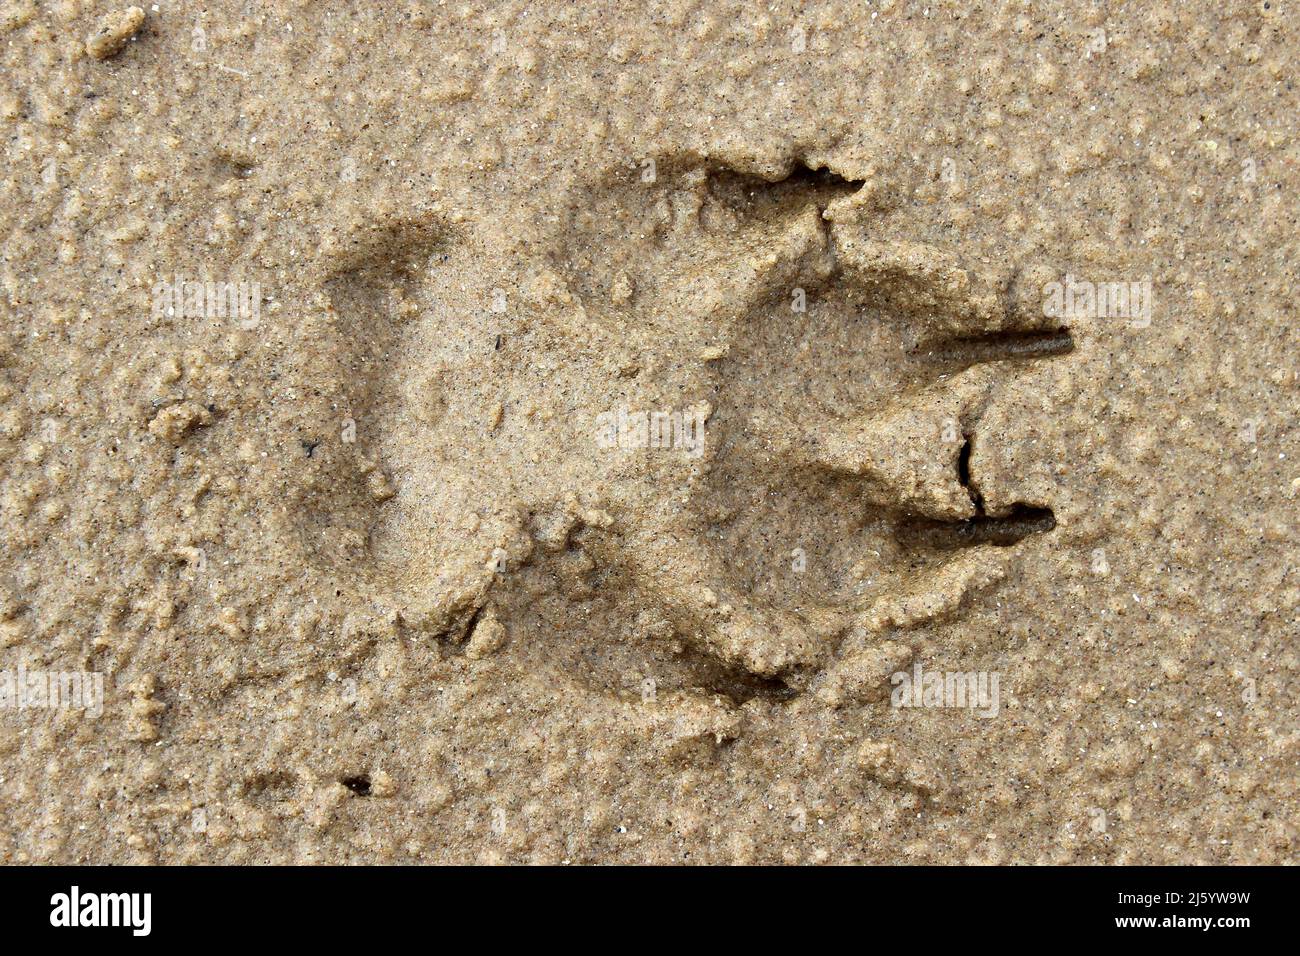 Dog Footprint In Wet Sand Stock Photo